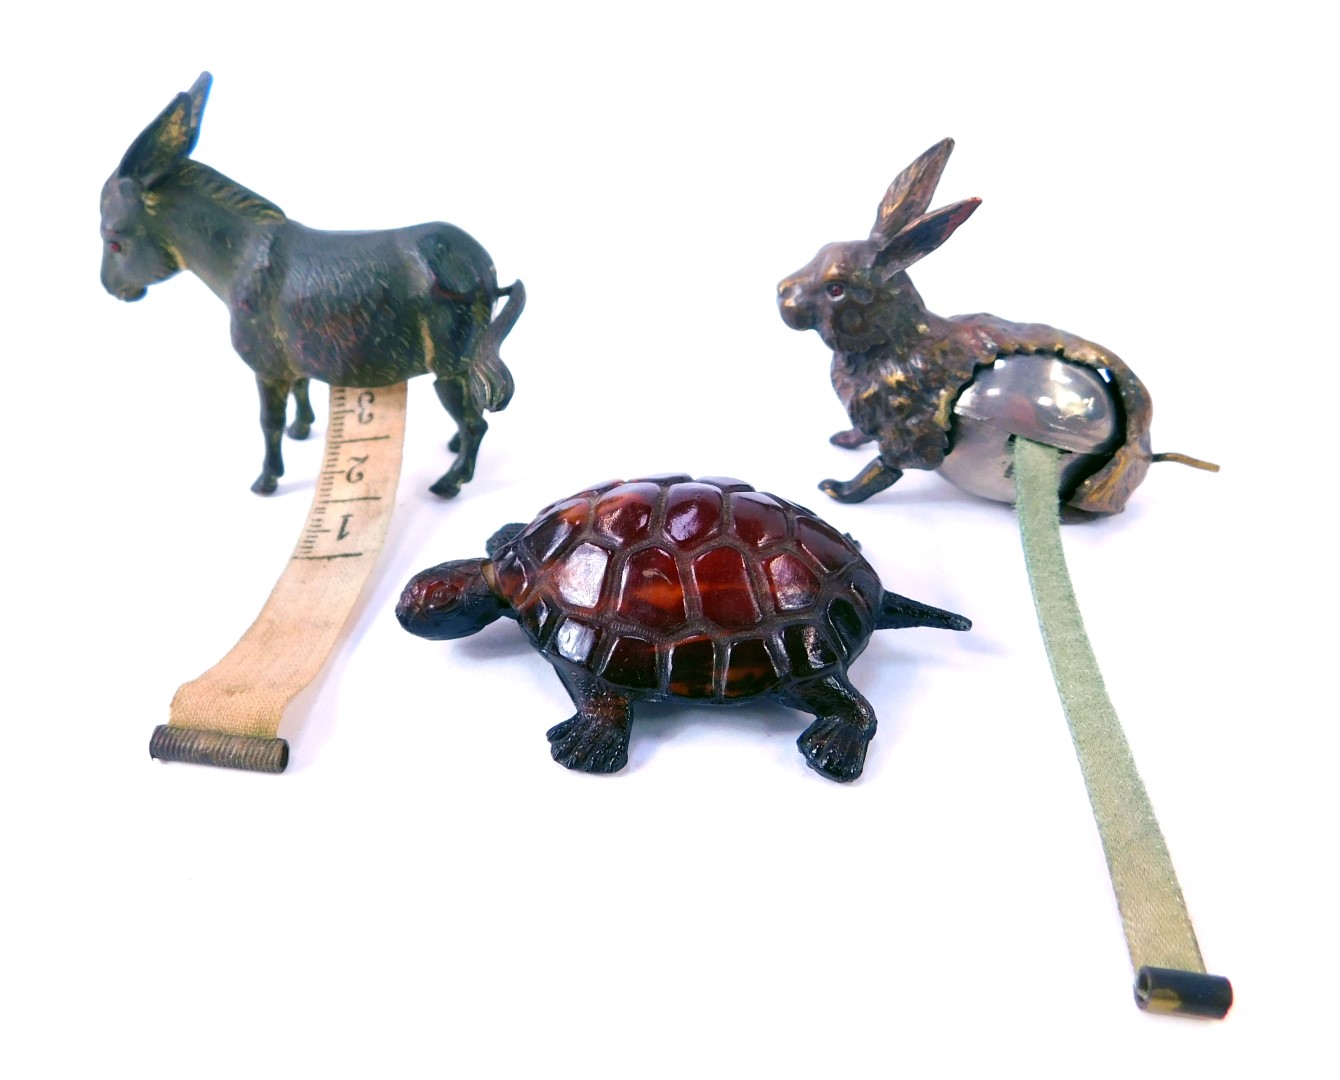 Three novelty tape measures, modelled as a donkey, hare, and a tortoise, the donkey 5.5cm high.